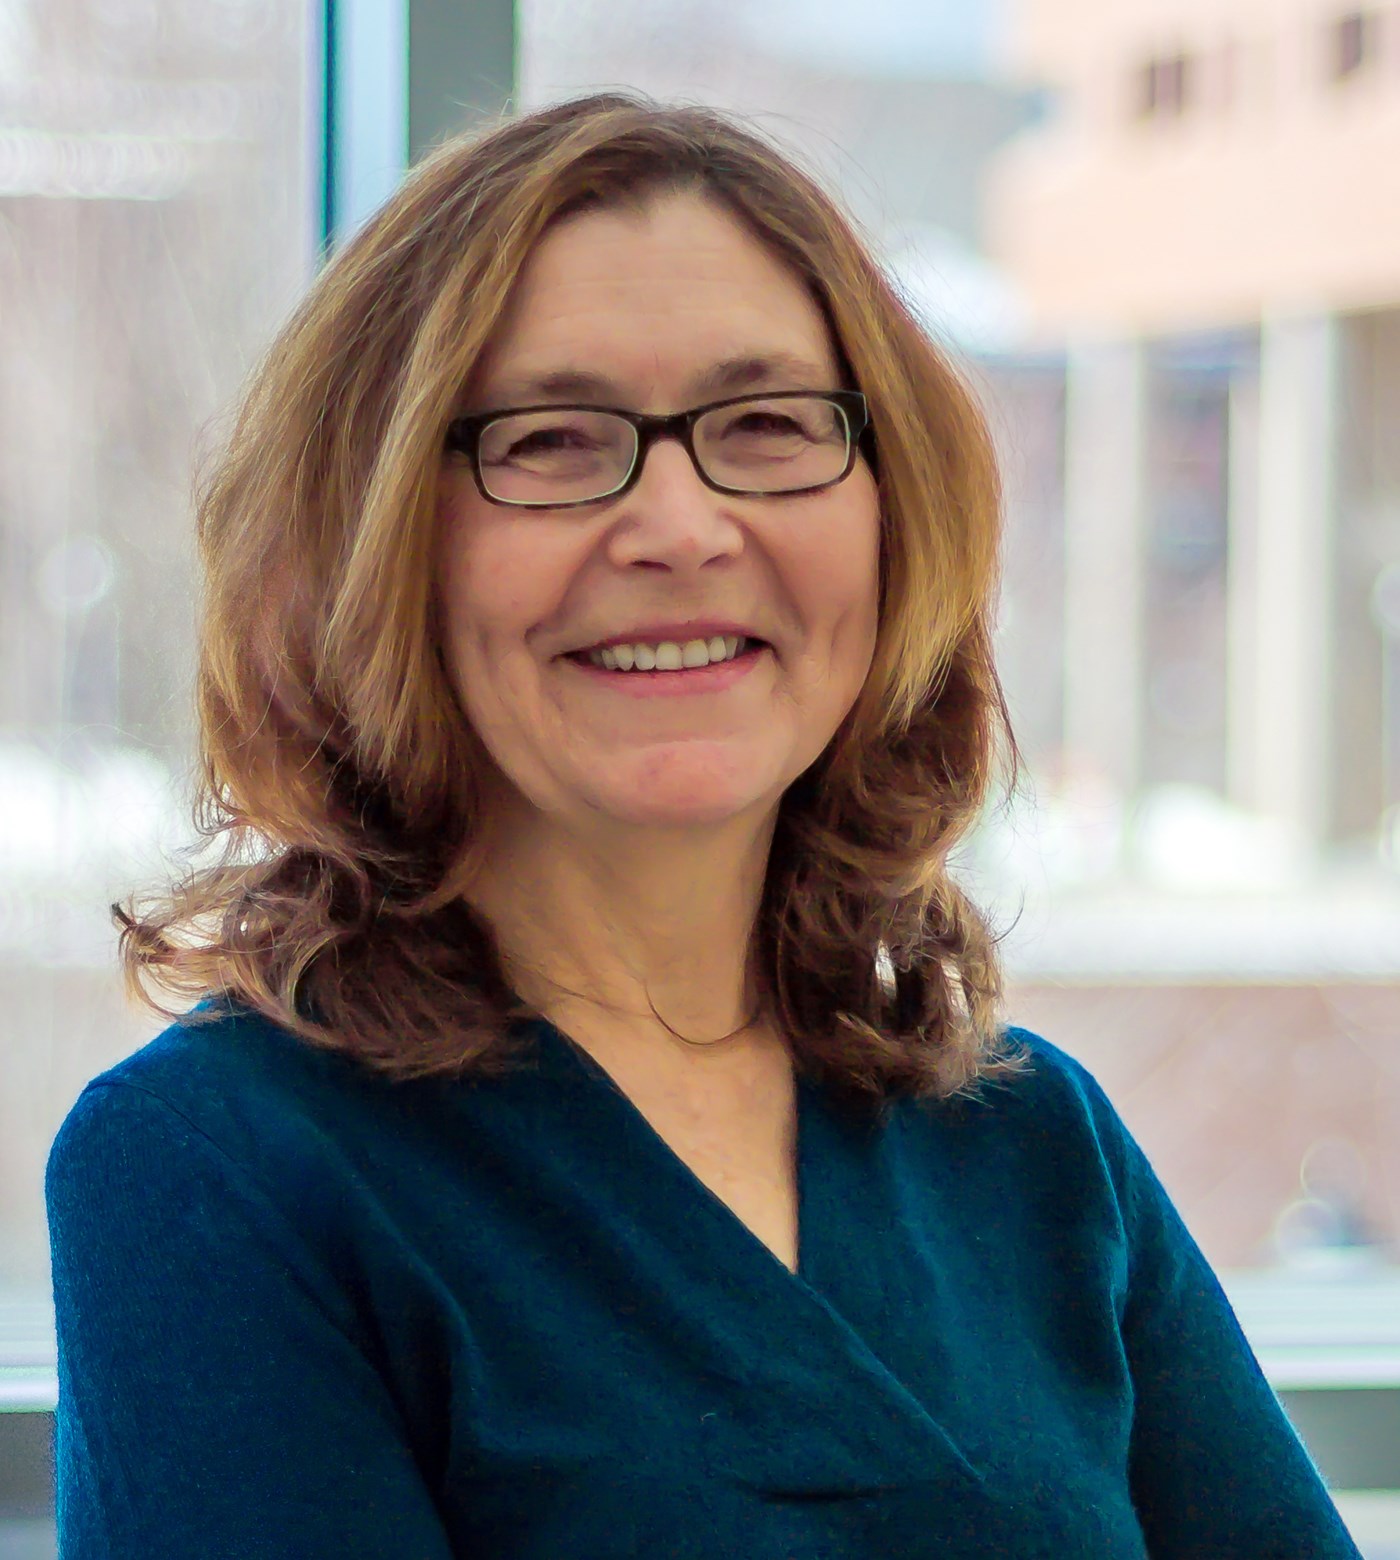 Janet Barnes-Farrell is a Professor and Division Head, Industrial / Organizational Psychology; Director, Industrial Psychology Applications Center (IPAC) at UCONN and associated with UMass Lowell's CPH-NEW.